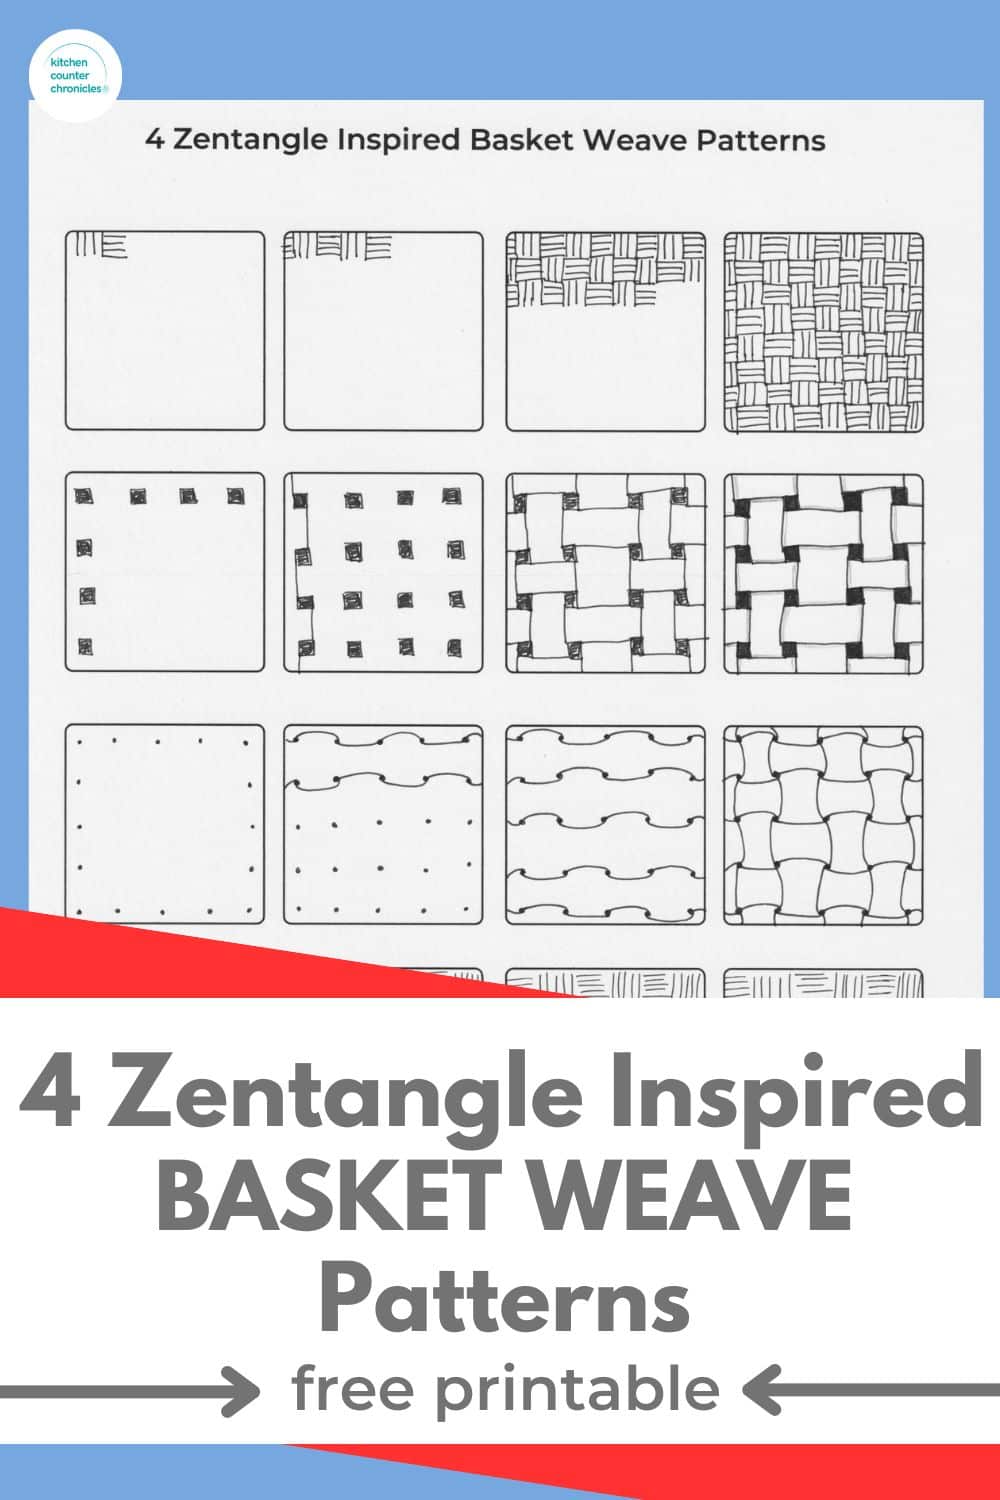 4 zentangle inspired basket weave patterns free printable title with print out of patterns